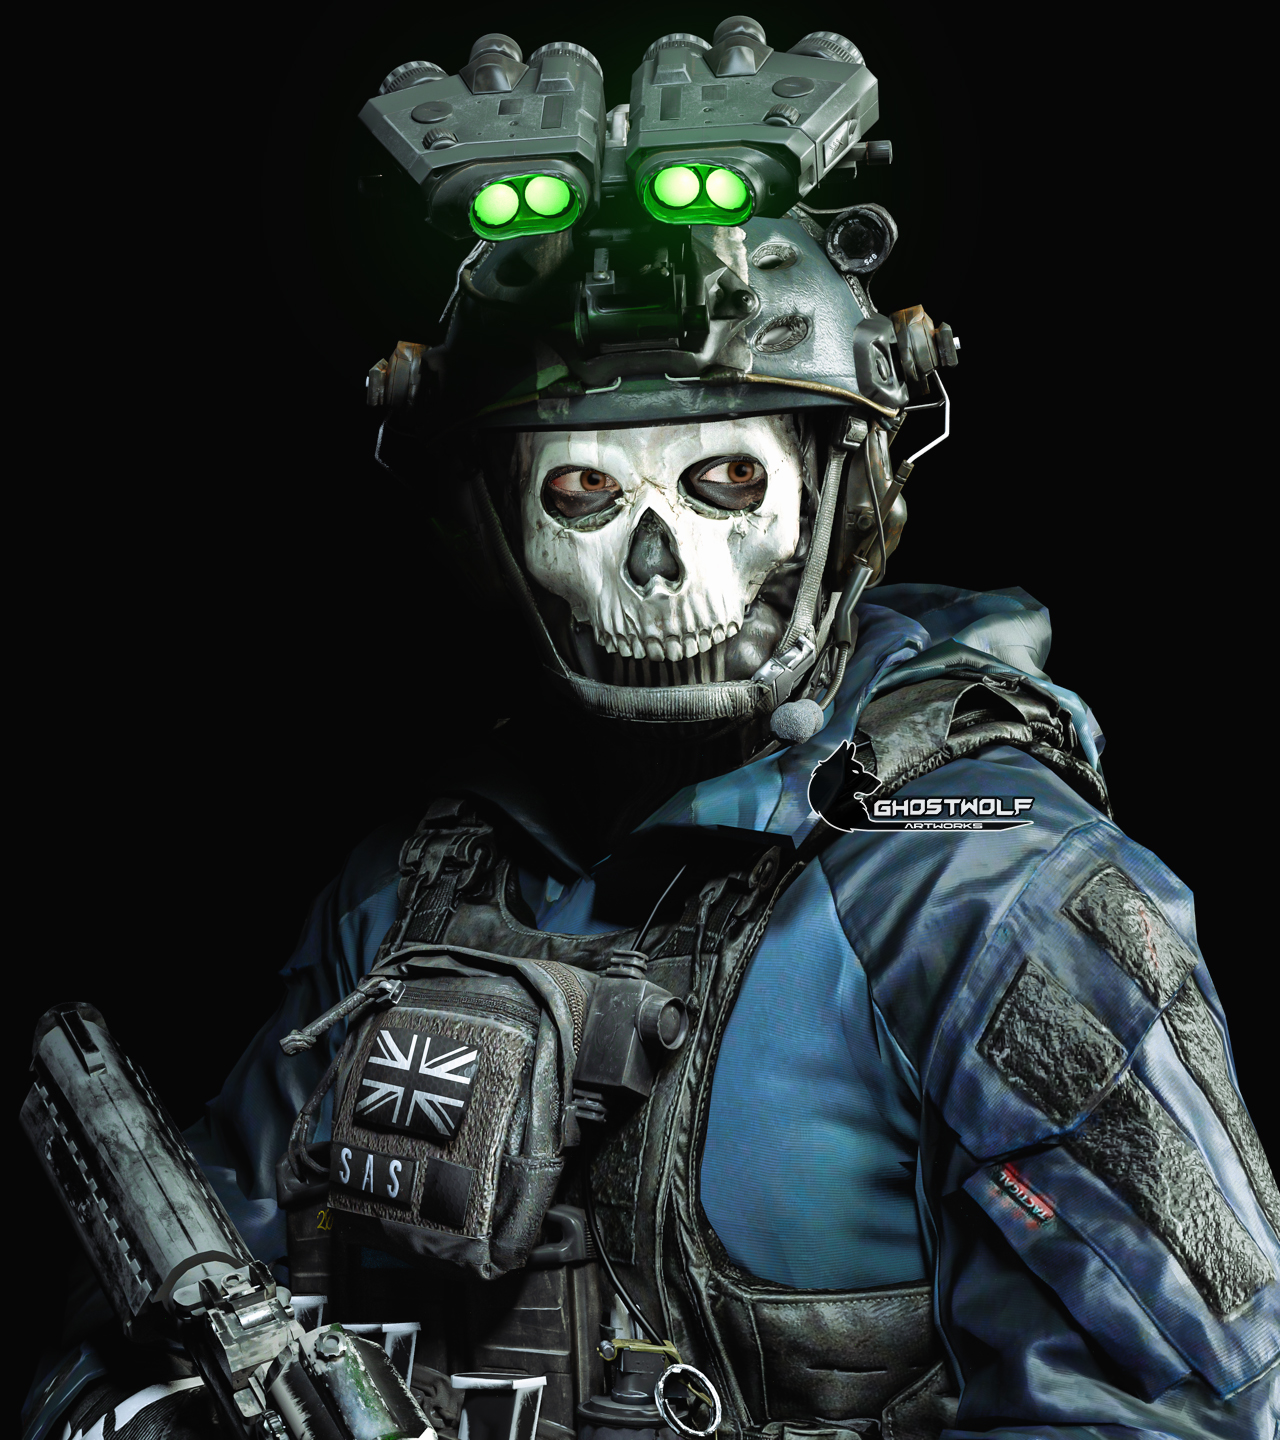 Call of Duty: Modern Warfare 2's Ghost has been unmasked, and it's